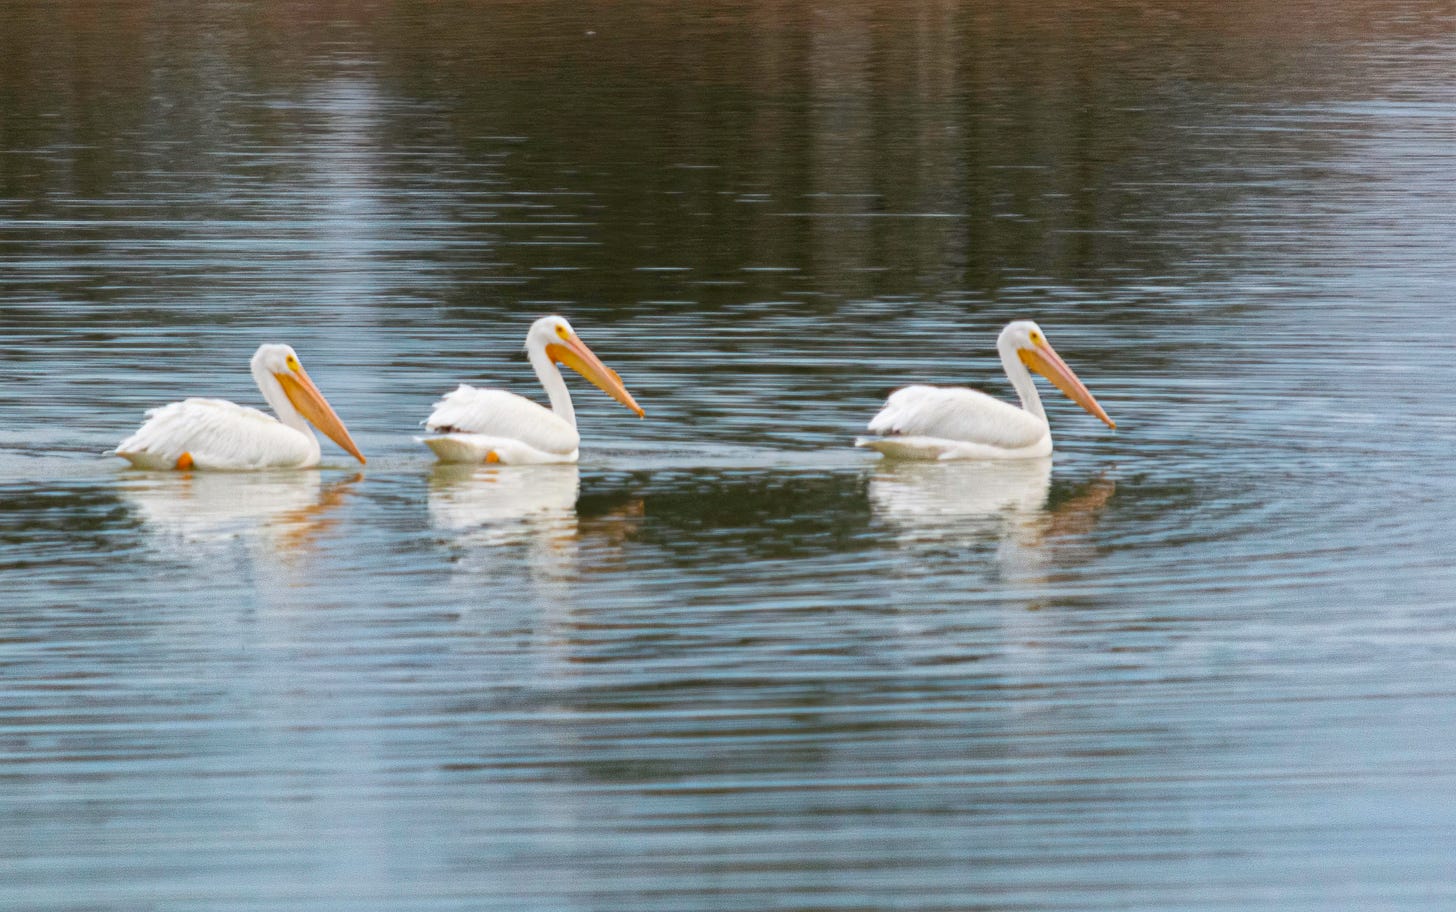 three American White Pelicans swimming in a lake with the reflection of the sun on the blue water